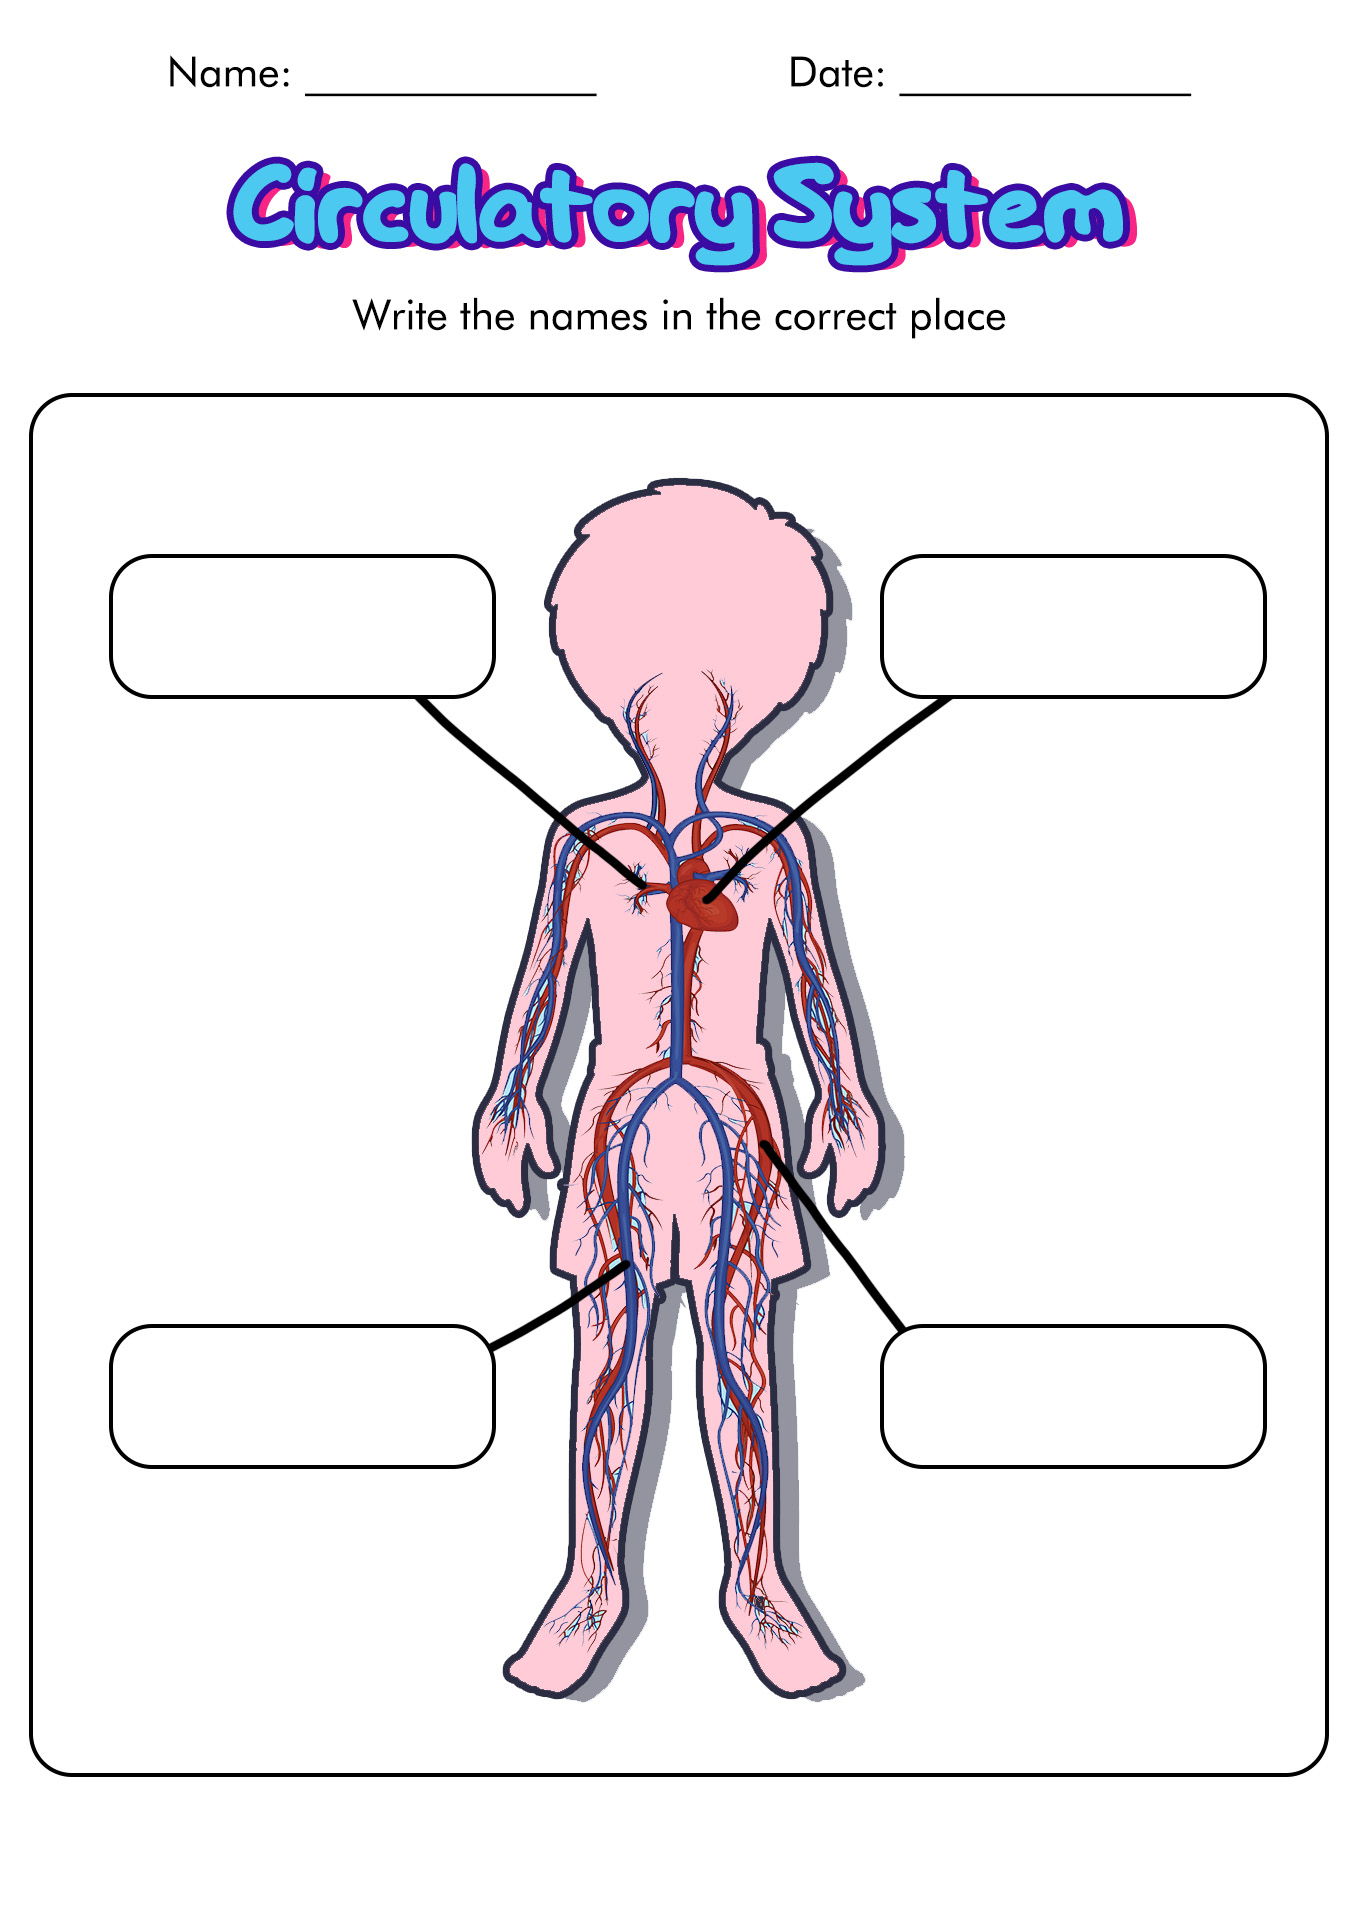 Circulatory System Worksheets for Kids